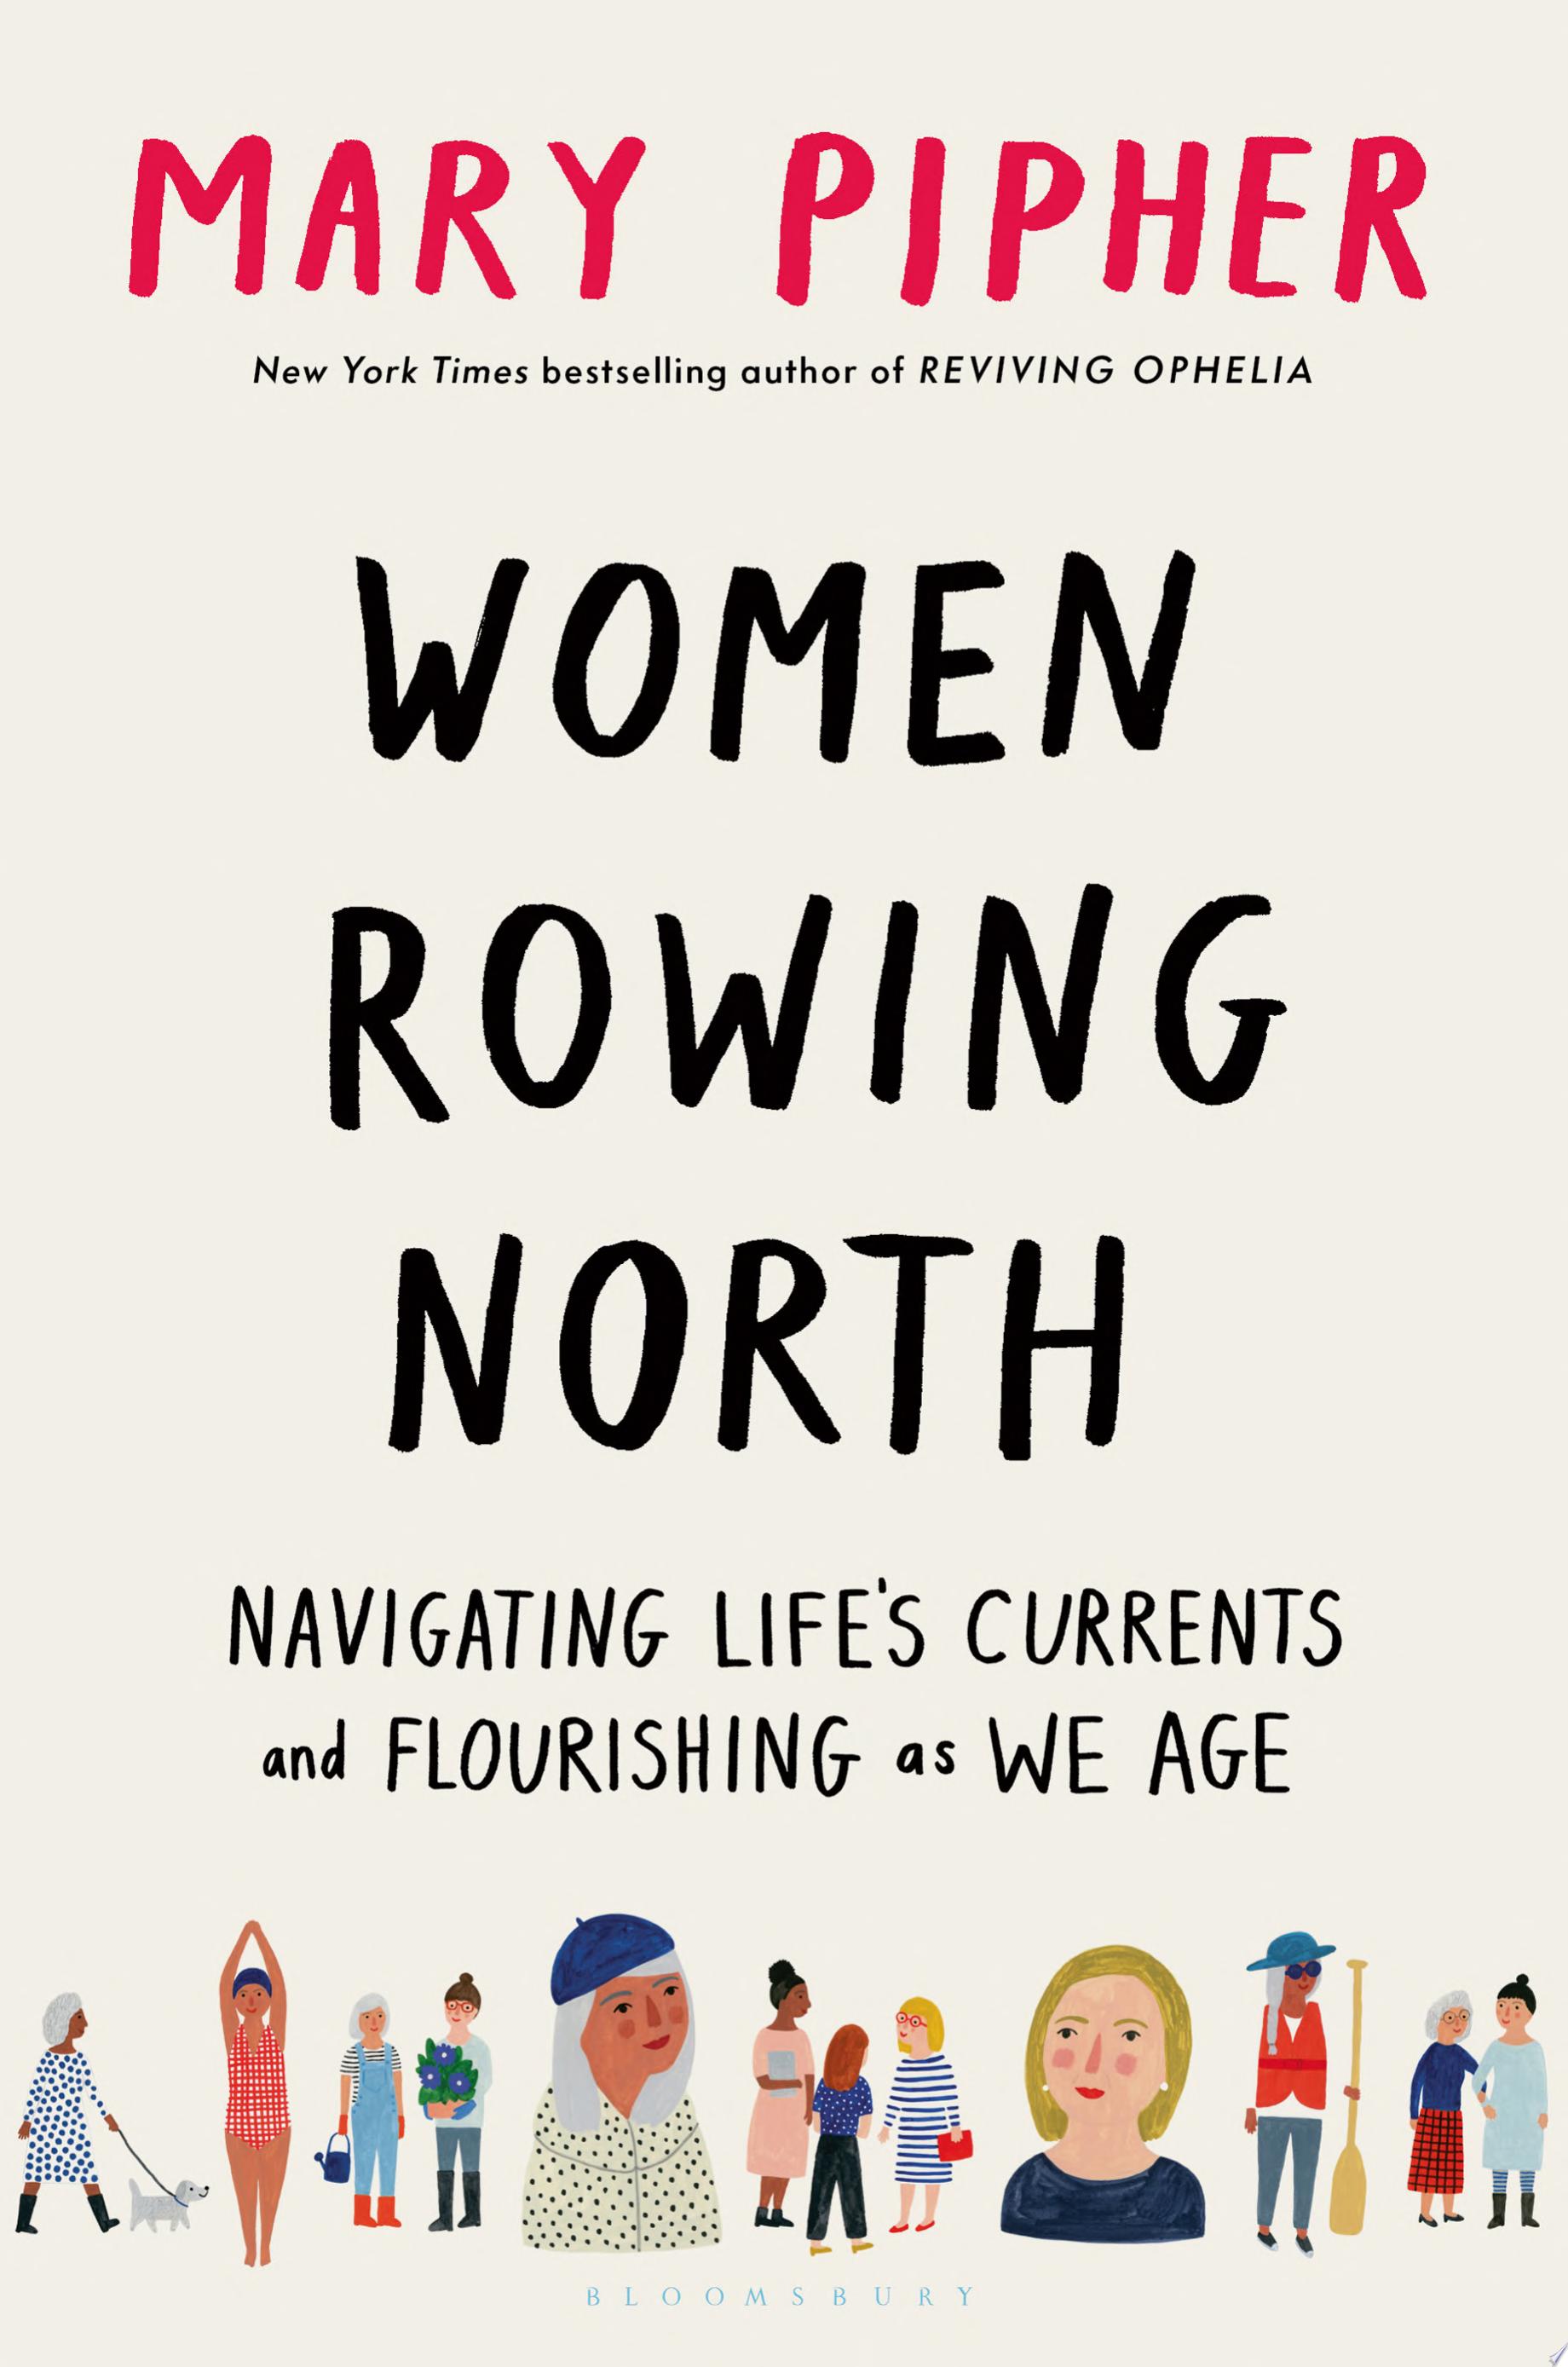 Image for "Women Rowing North"